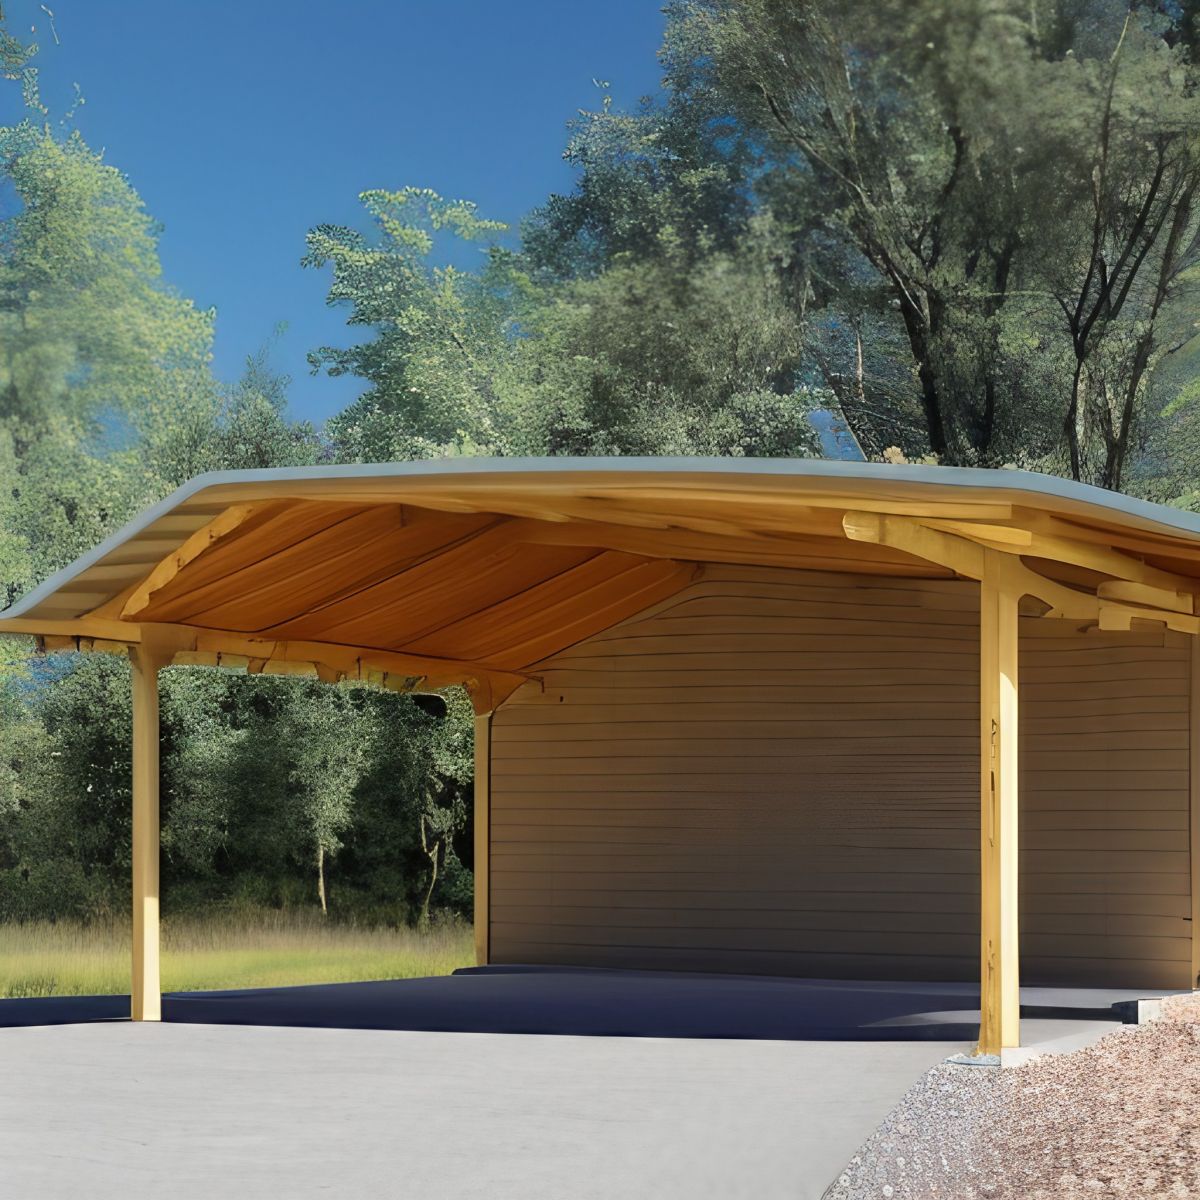 carport with saltbox roof pitched at an unequal angle, making one side longer and the other shorter for a steeper slope